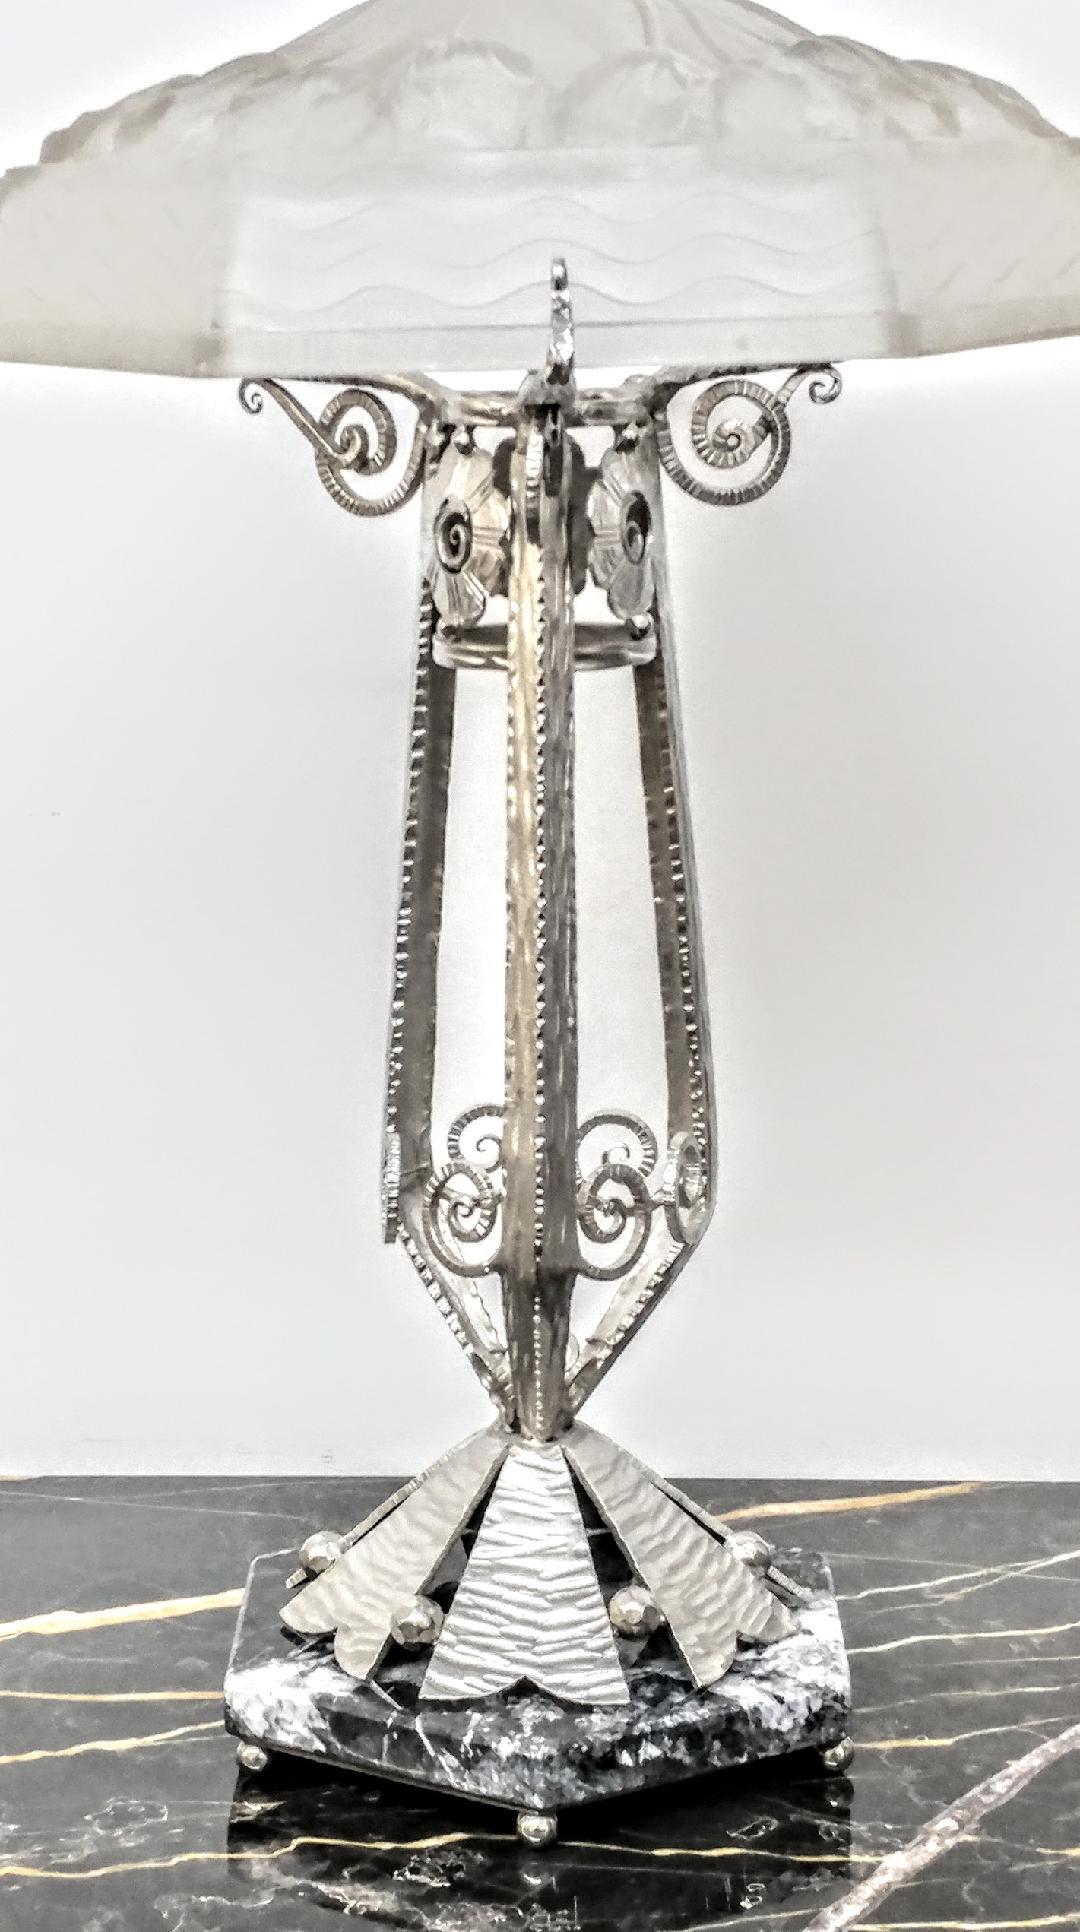 French Art Deco hand forged wrought iron table lamp in great condition. Decorated with fine intricate stylized symmetric with geometric scrolled and flower motif and detailed throughout with a tulip motif glass shade. The fixture was replated in